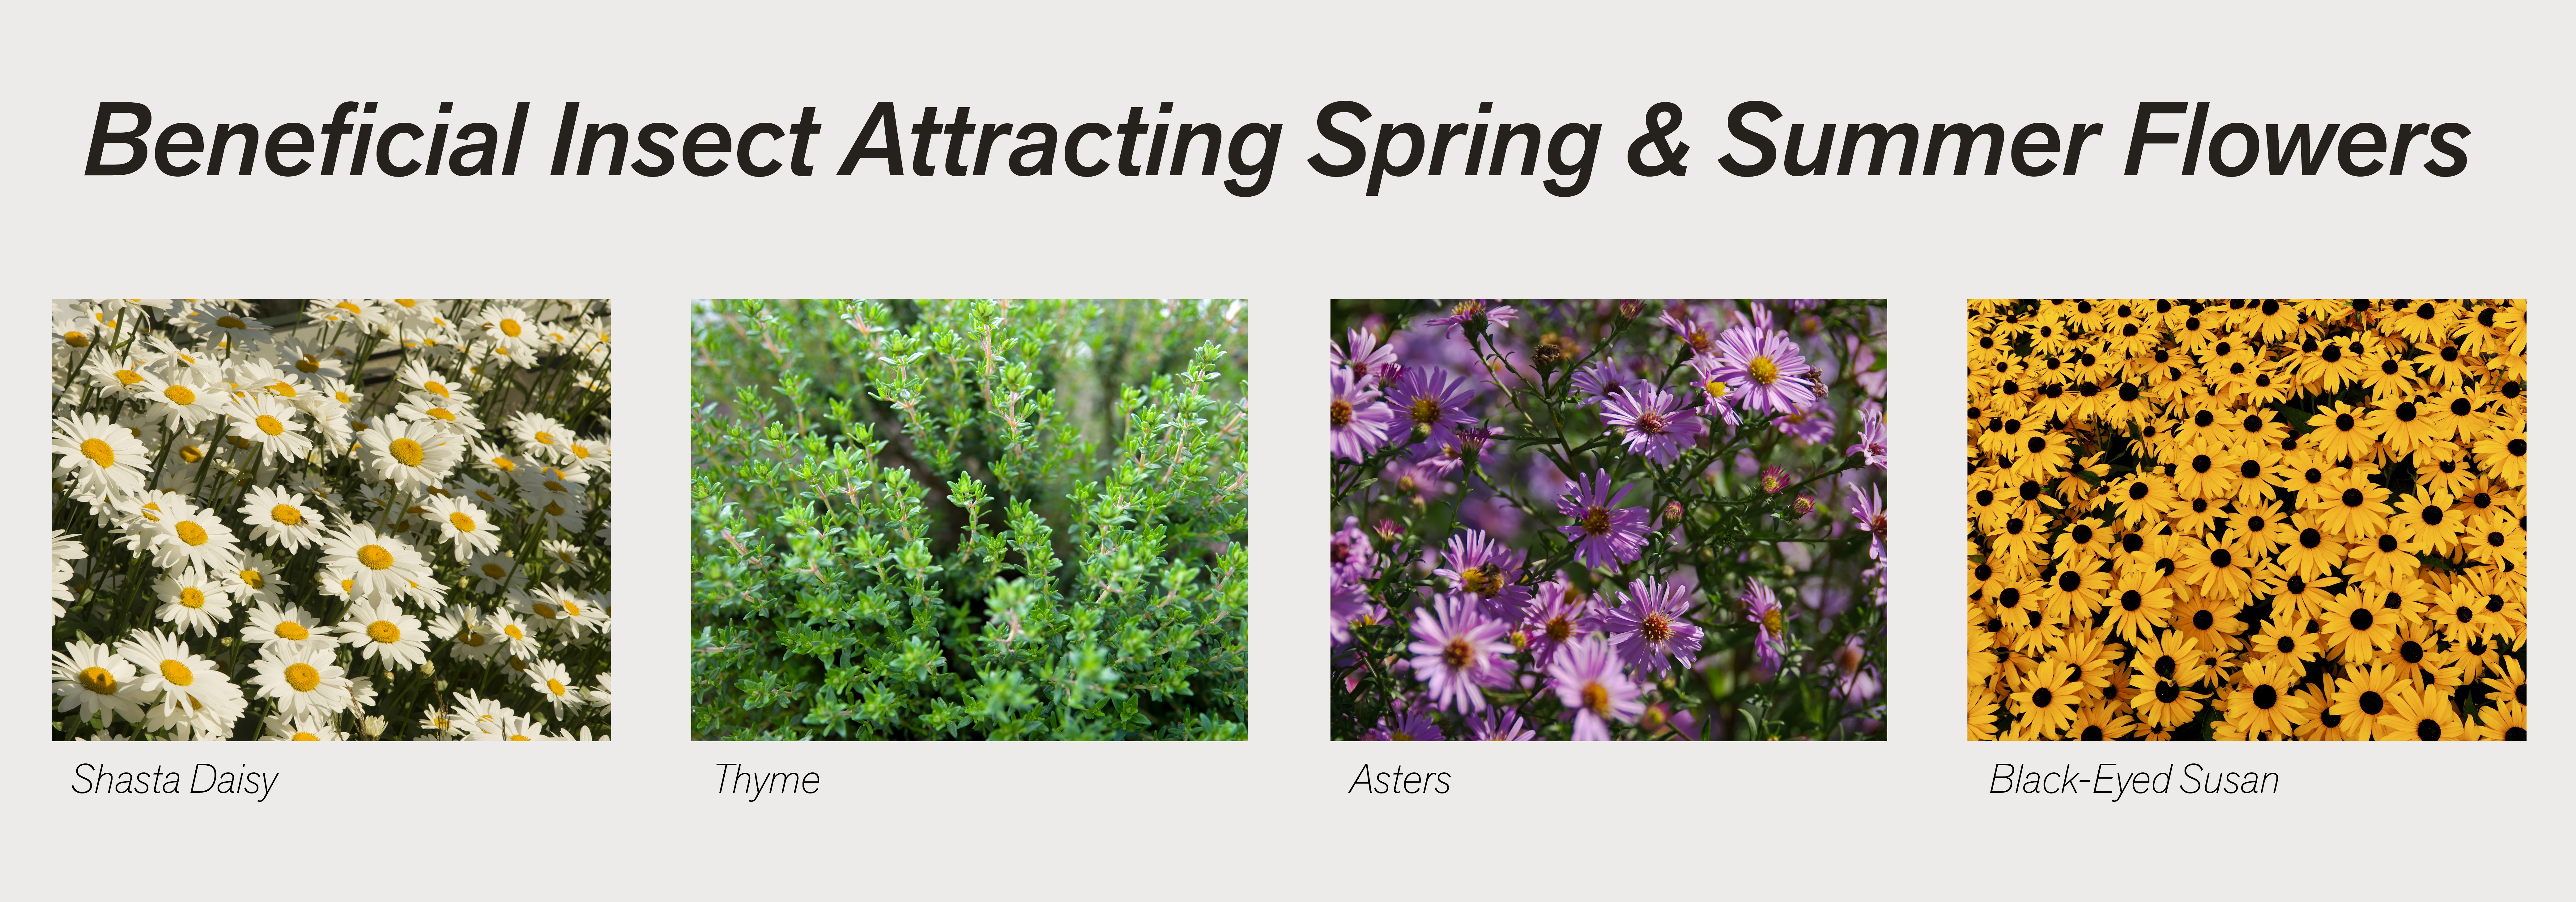 Beneficial Insect Attracting Spring and Summer Flowers 